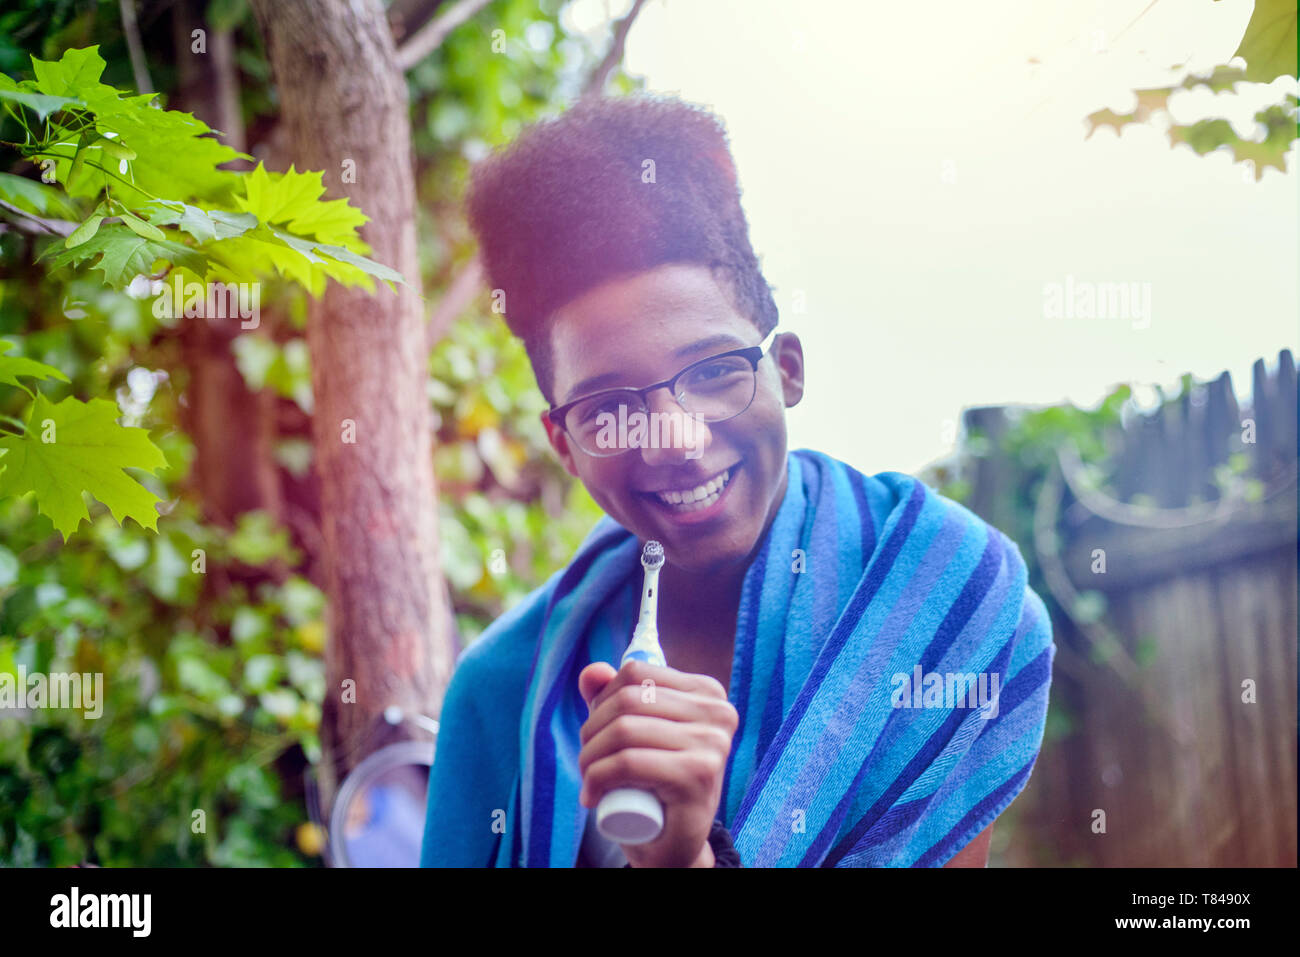 Teenage boy with afro flat top hairstyle holding electric toothbrush in garden, portrait Stock Photo